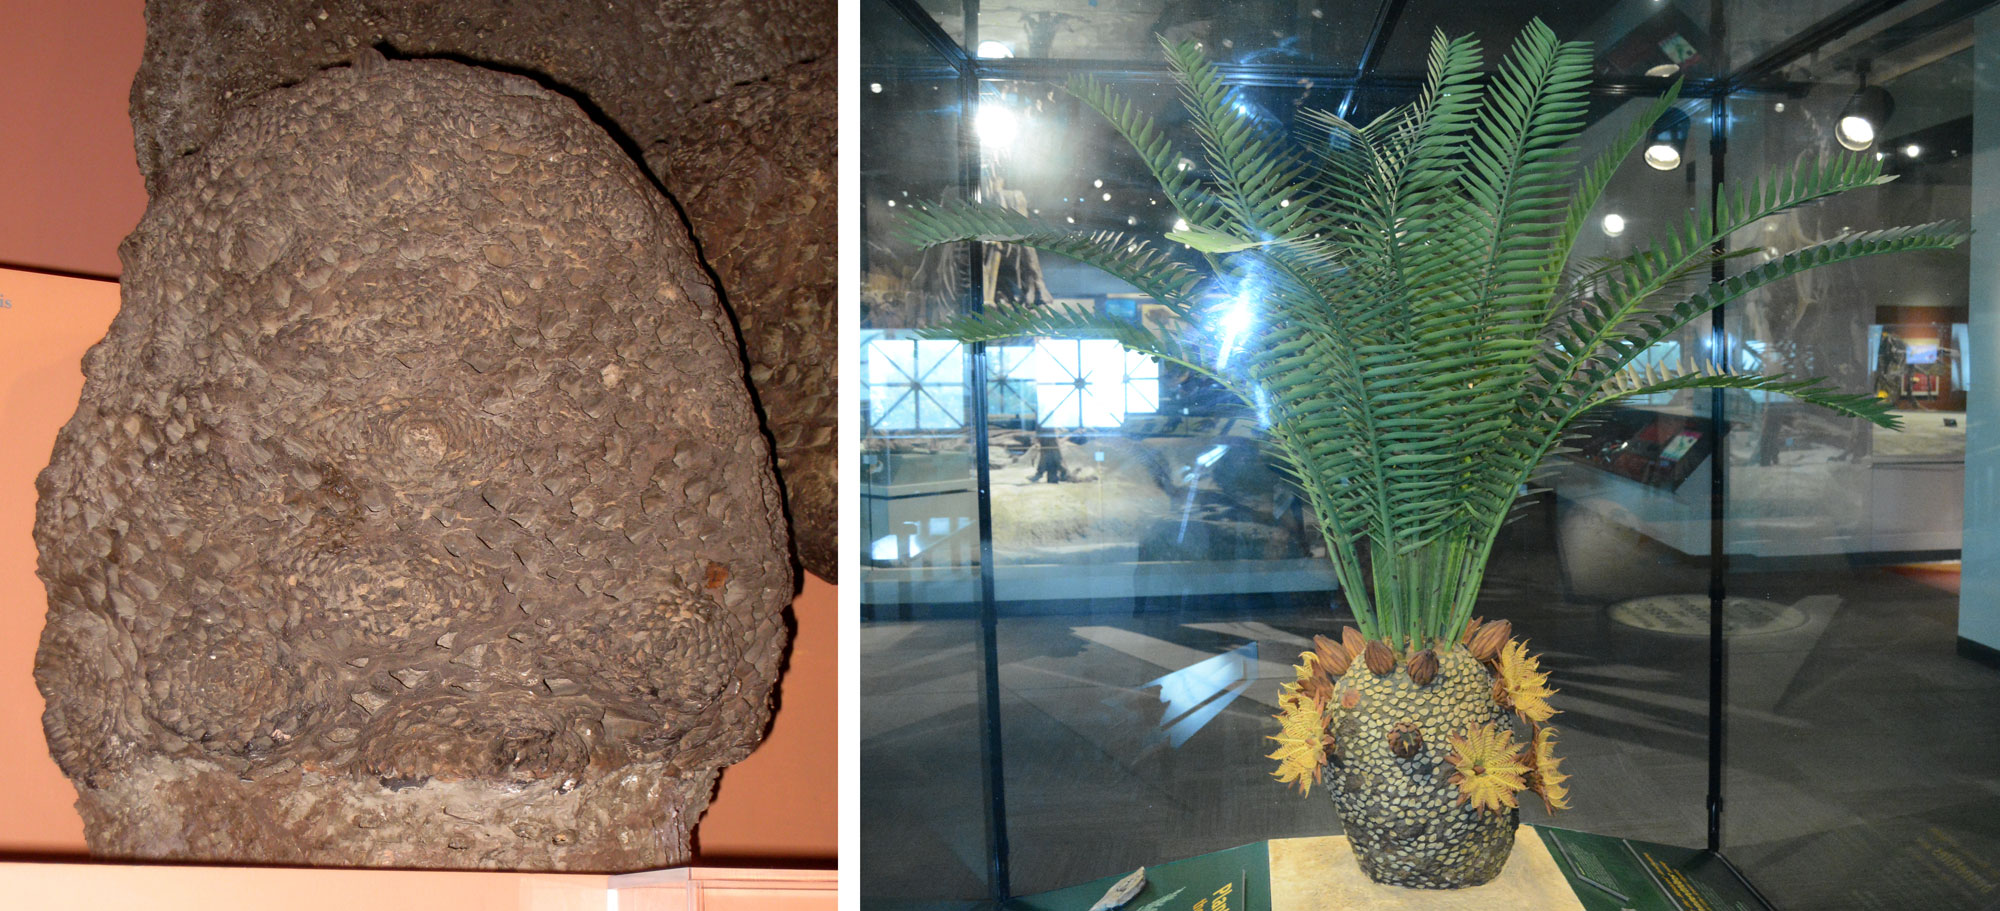 2-Panel image made up of photographs of cycadeoids. Panel 1: Photo of a specimen of Cycadeoidea dacotensis from the Early Cretaceous of South Dakota on display in a museum. The specimen is a single petrified trunk. The trunk is short, thick, and rounded at the top. It is covered with diamond-shaped leaf bases that are helically arranged. Panel 2: Model of a living cycadeoid on display in a museum. The living plant and a short, thick stem with a cluster of pinnately compound leaves growing from the top. On the sides of the trunk are flower-like open cones and somewhat conical closed cones.